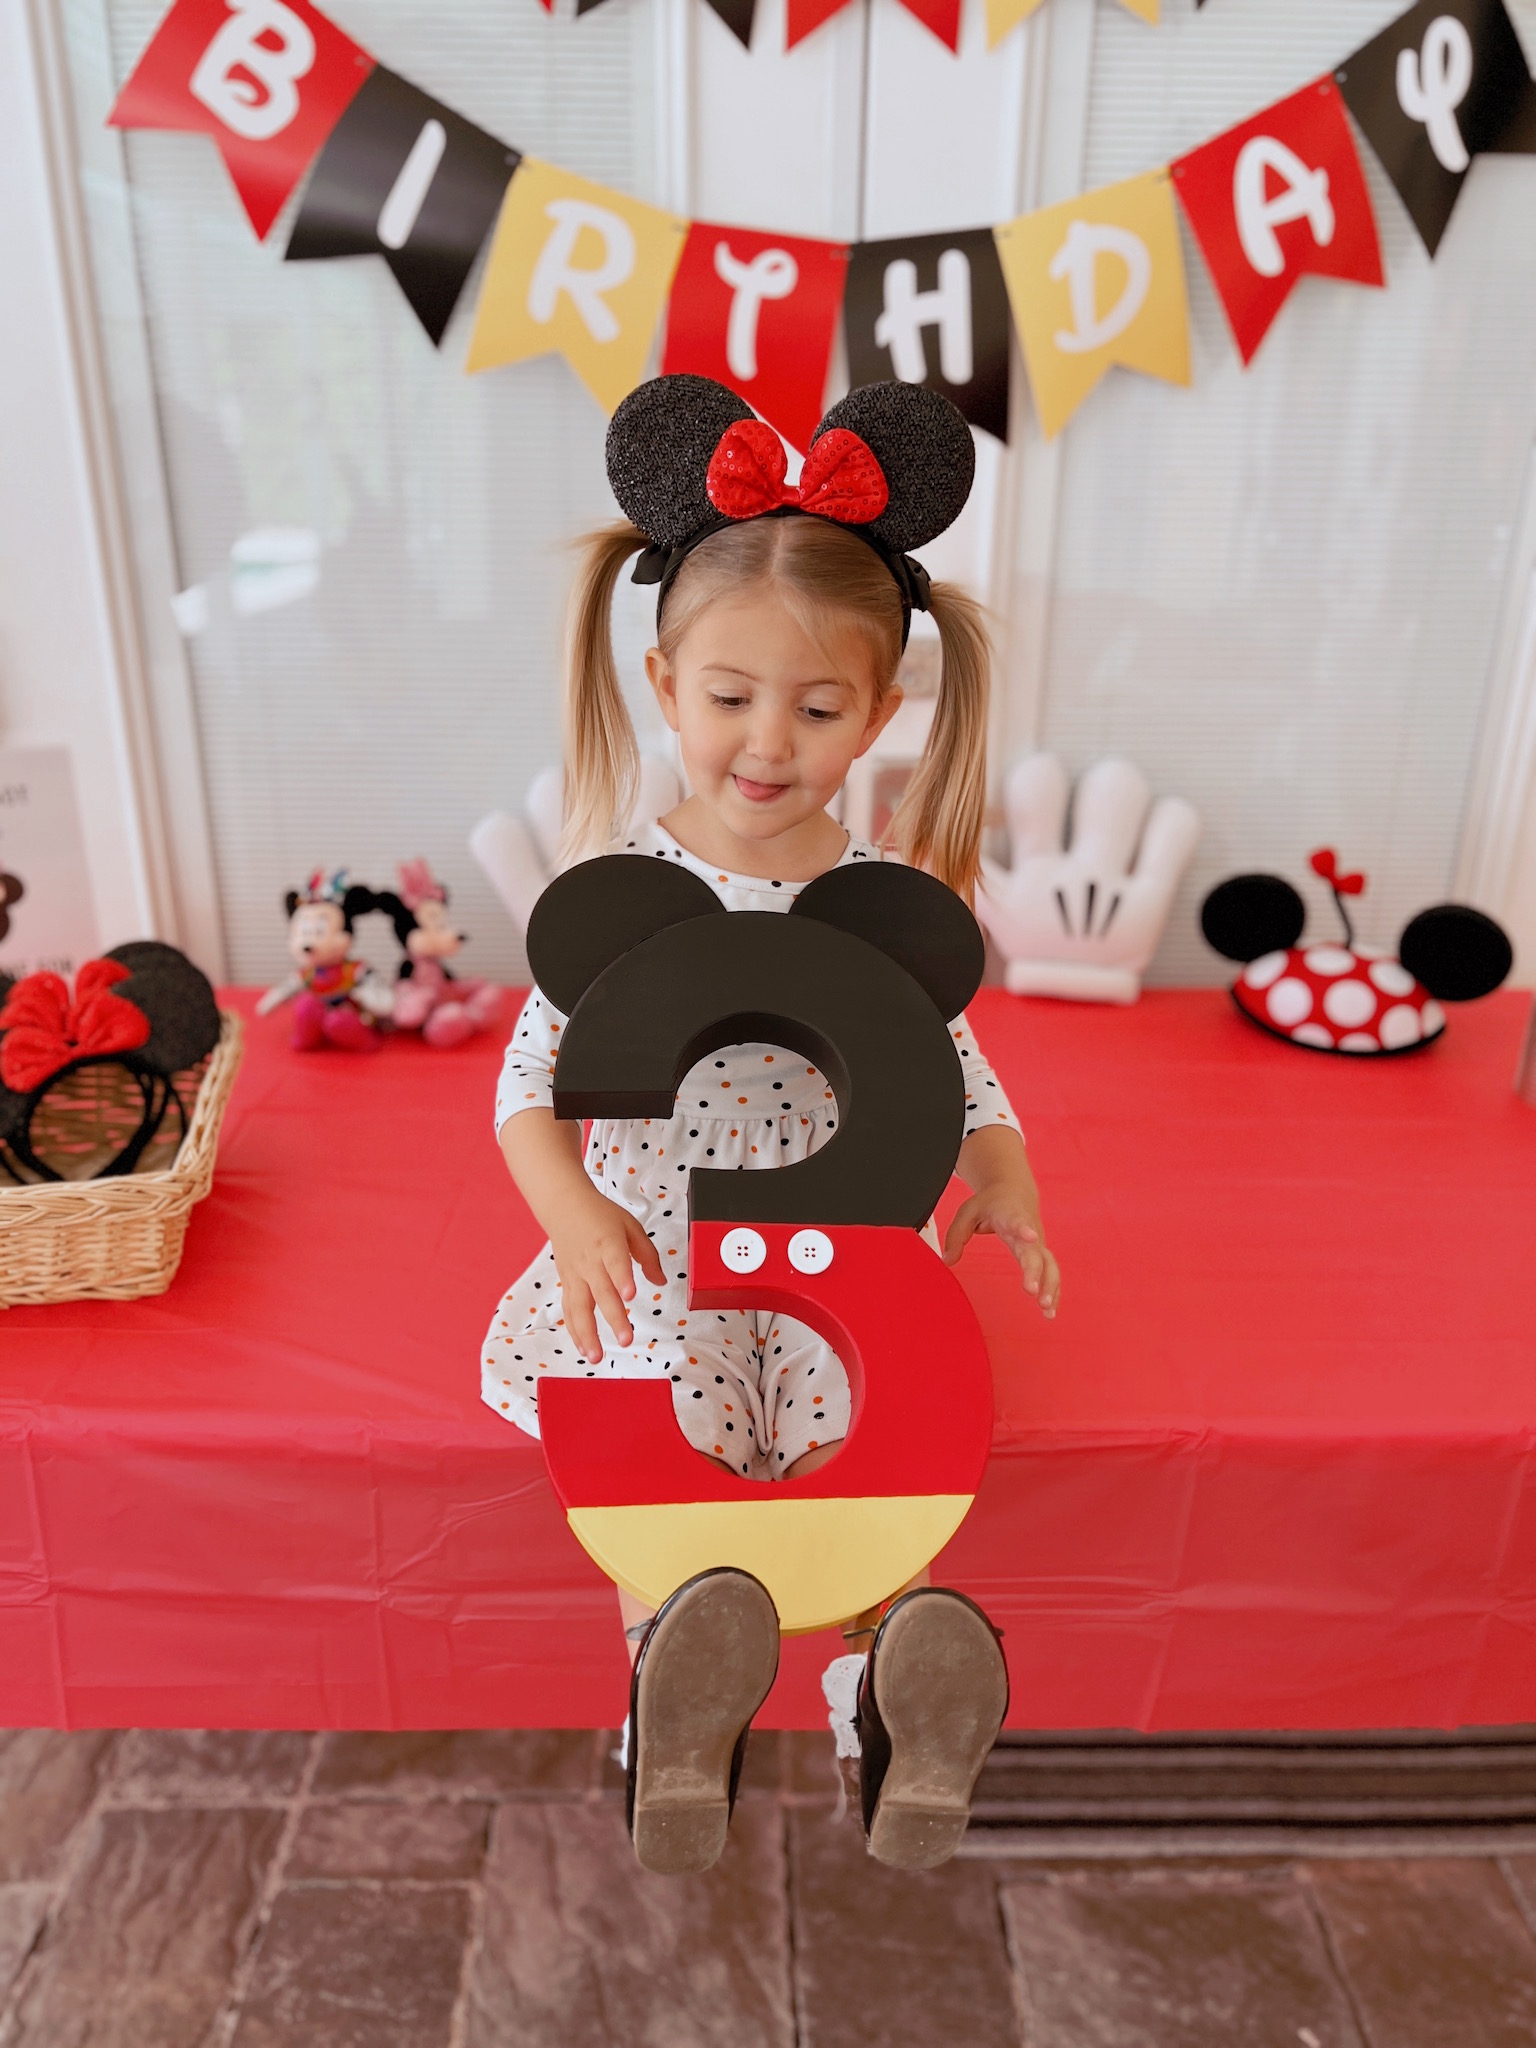 Large number 3 photo prop DIY for Pepper's Magical "Mickey & Minnie Mouse" 3rd Birthday Pool Party | Creative ideas for hosting a magical Mickey & Minnie themed birthday bash for your little Mouseketeer with do-able decor, punny snacks, and party games that are fun for all ages! via thinkingcloset.com